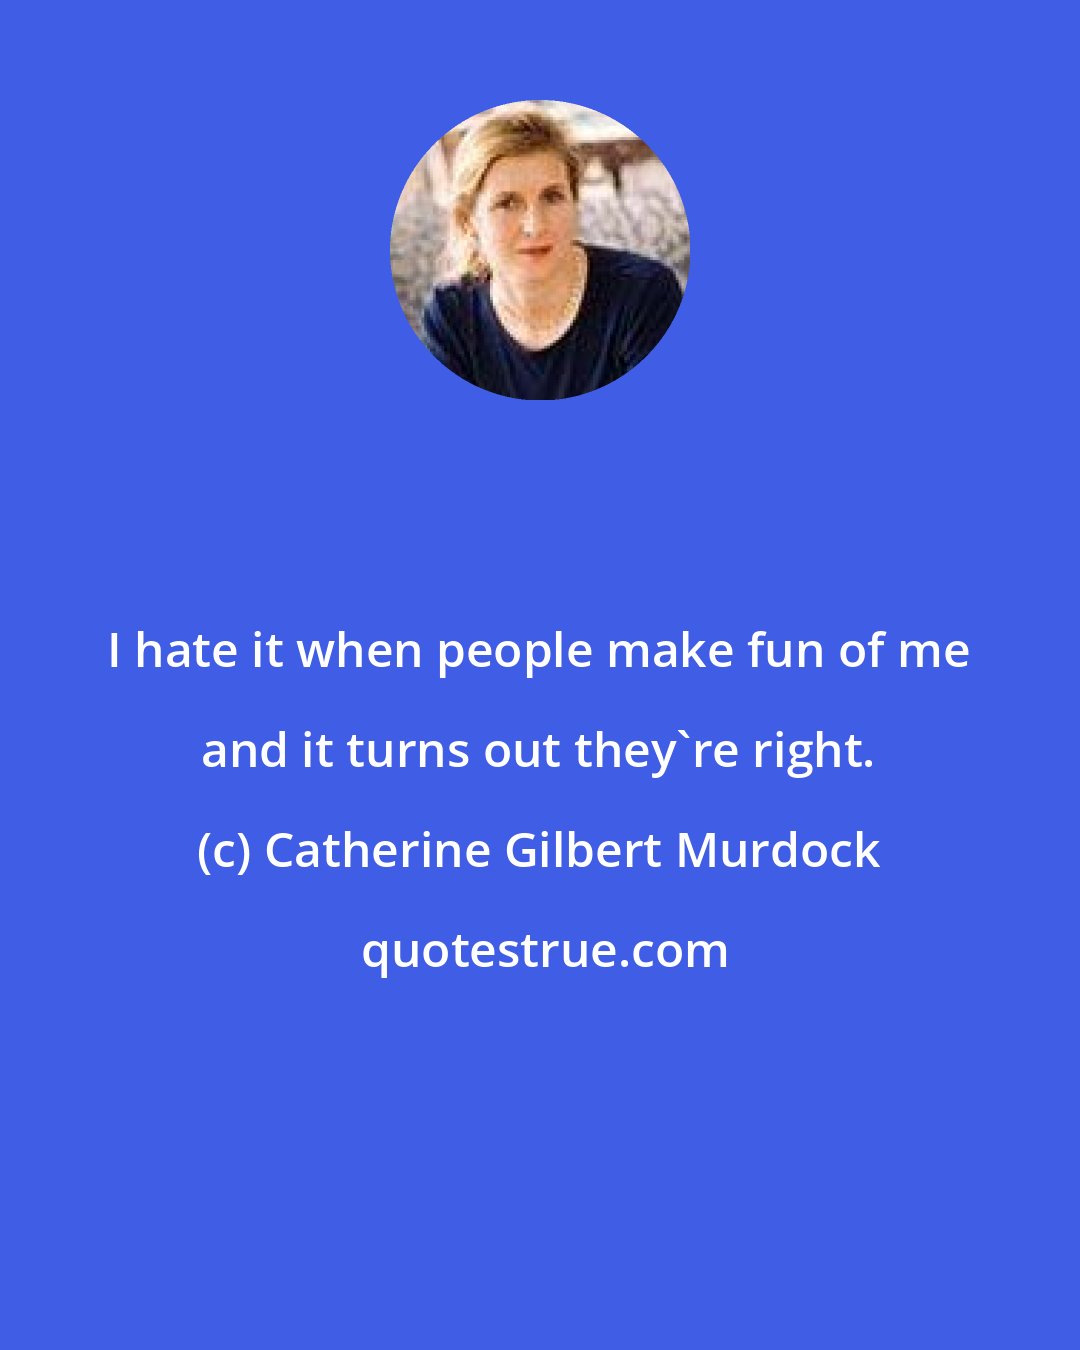 Catherine Gilbert Murdock: I hate it when people make fun of me and it turns out they're right.